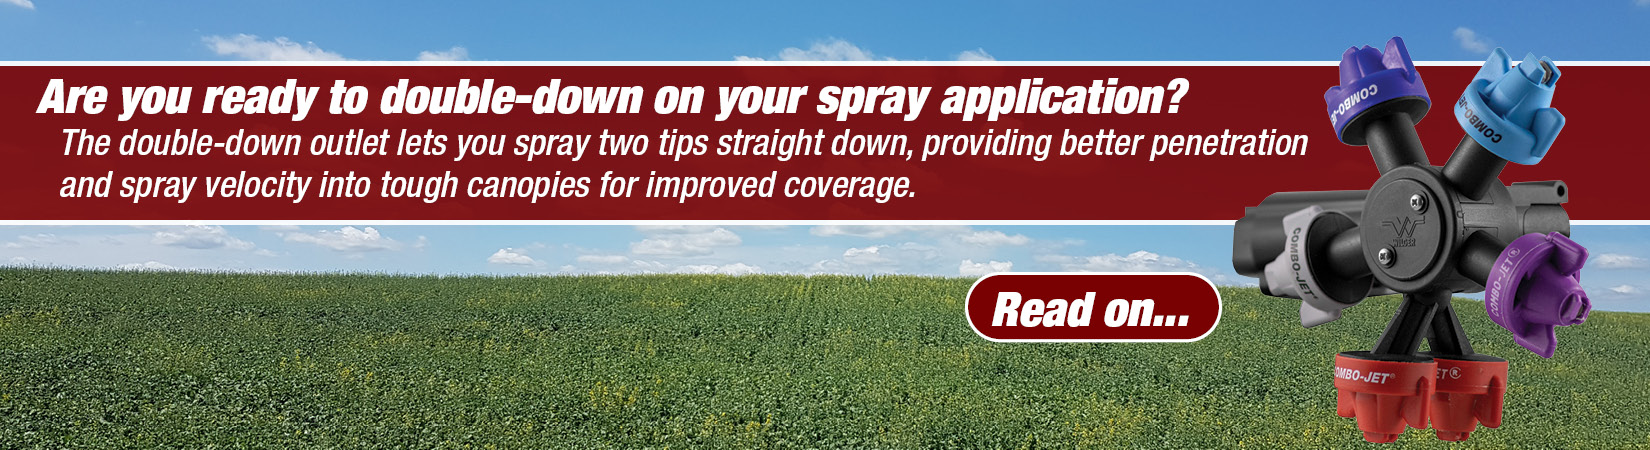 Spraying two tips straight down can provide significant benefits into certain situations that angled spray tips do not. The double-down turret allows any current user of Combo-rate turrets simply retro-fit to a double-down outlet.